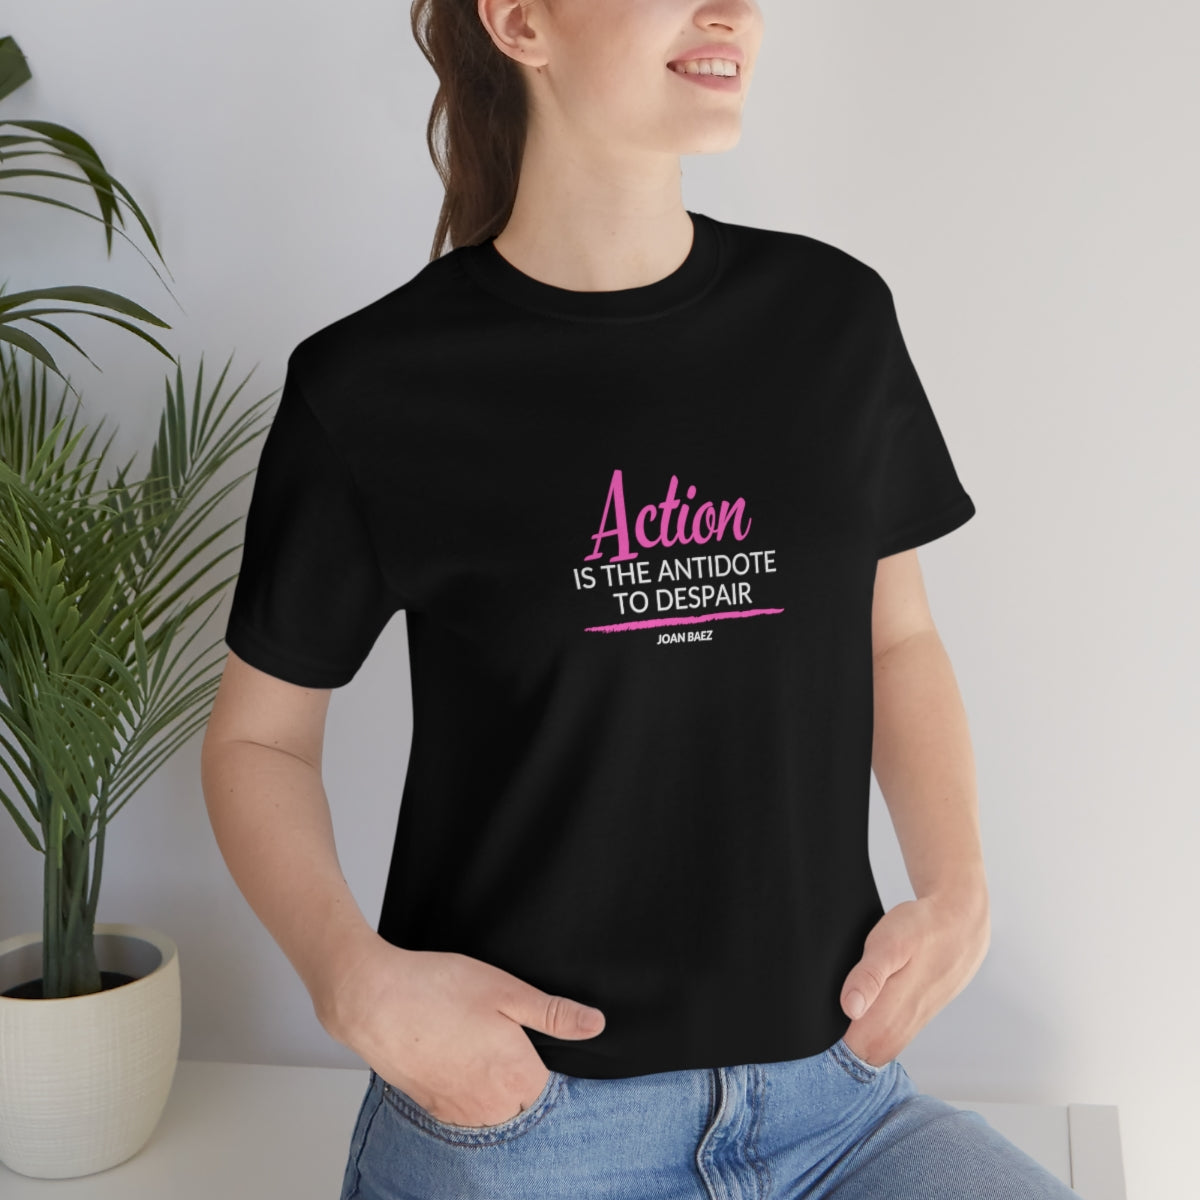 Joan Baez Motivational T Shirts, Action is the Antidote to Despair Quote Shirt, Positive Sayings, Quotes on T Shirts, Unisex